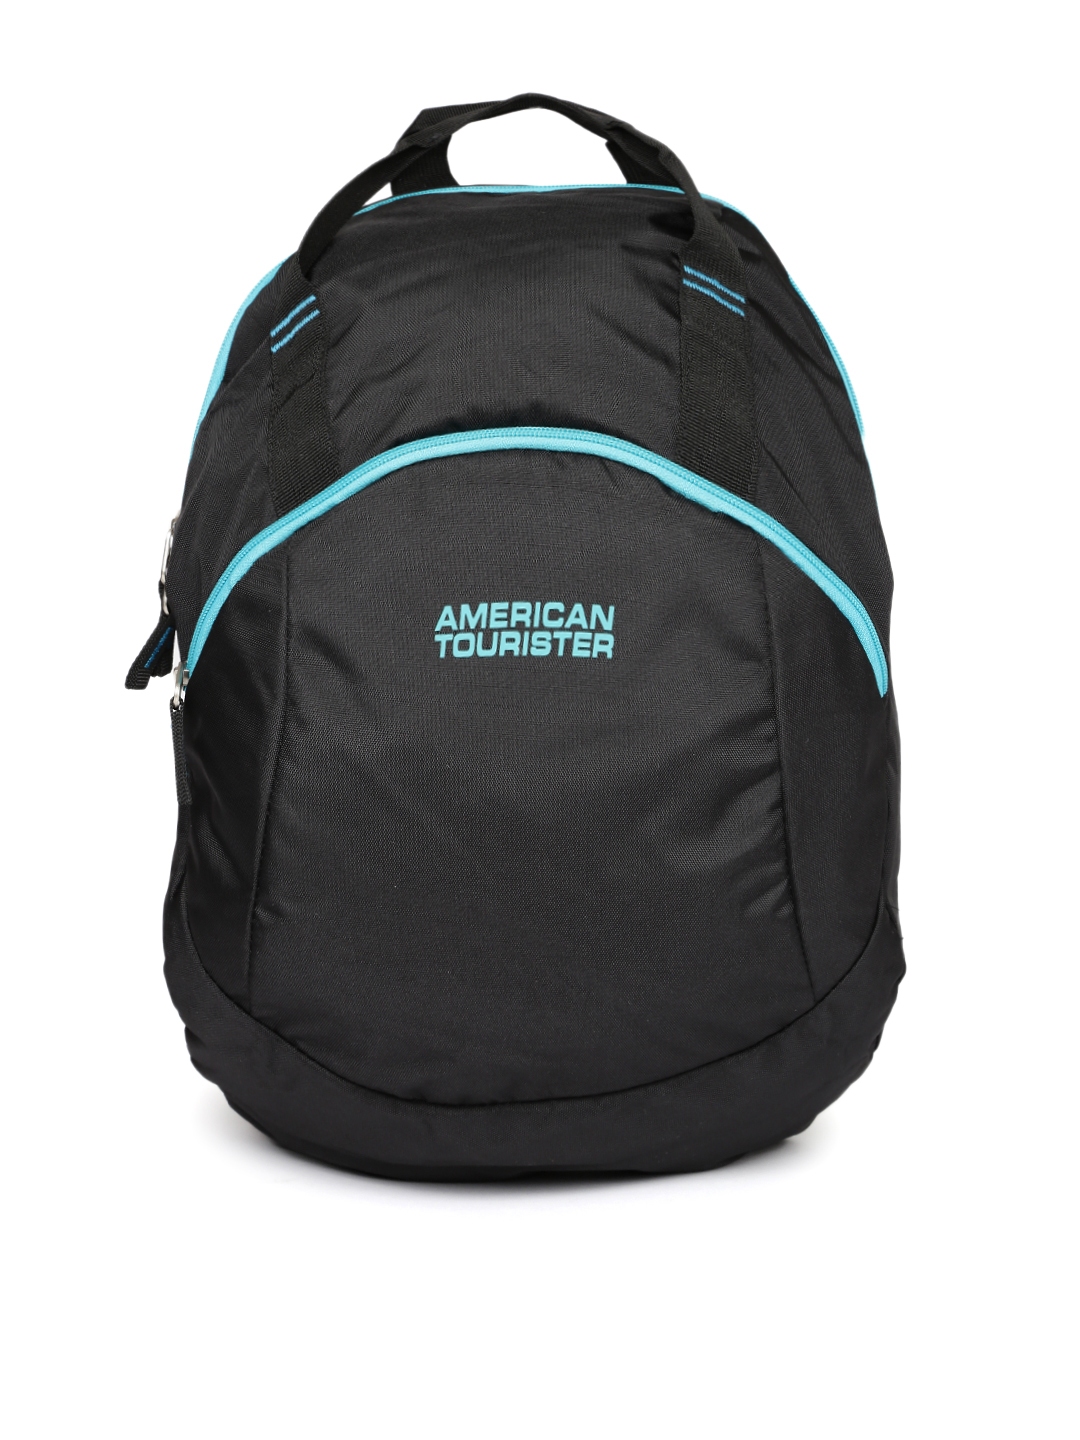 American Tourister | Travel Backpack | Best Bags BD | Rain Cover | Sale –  ARAMM LIFES